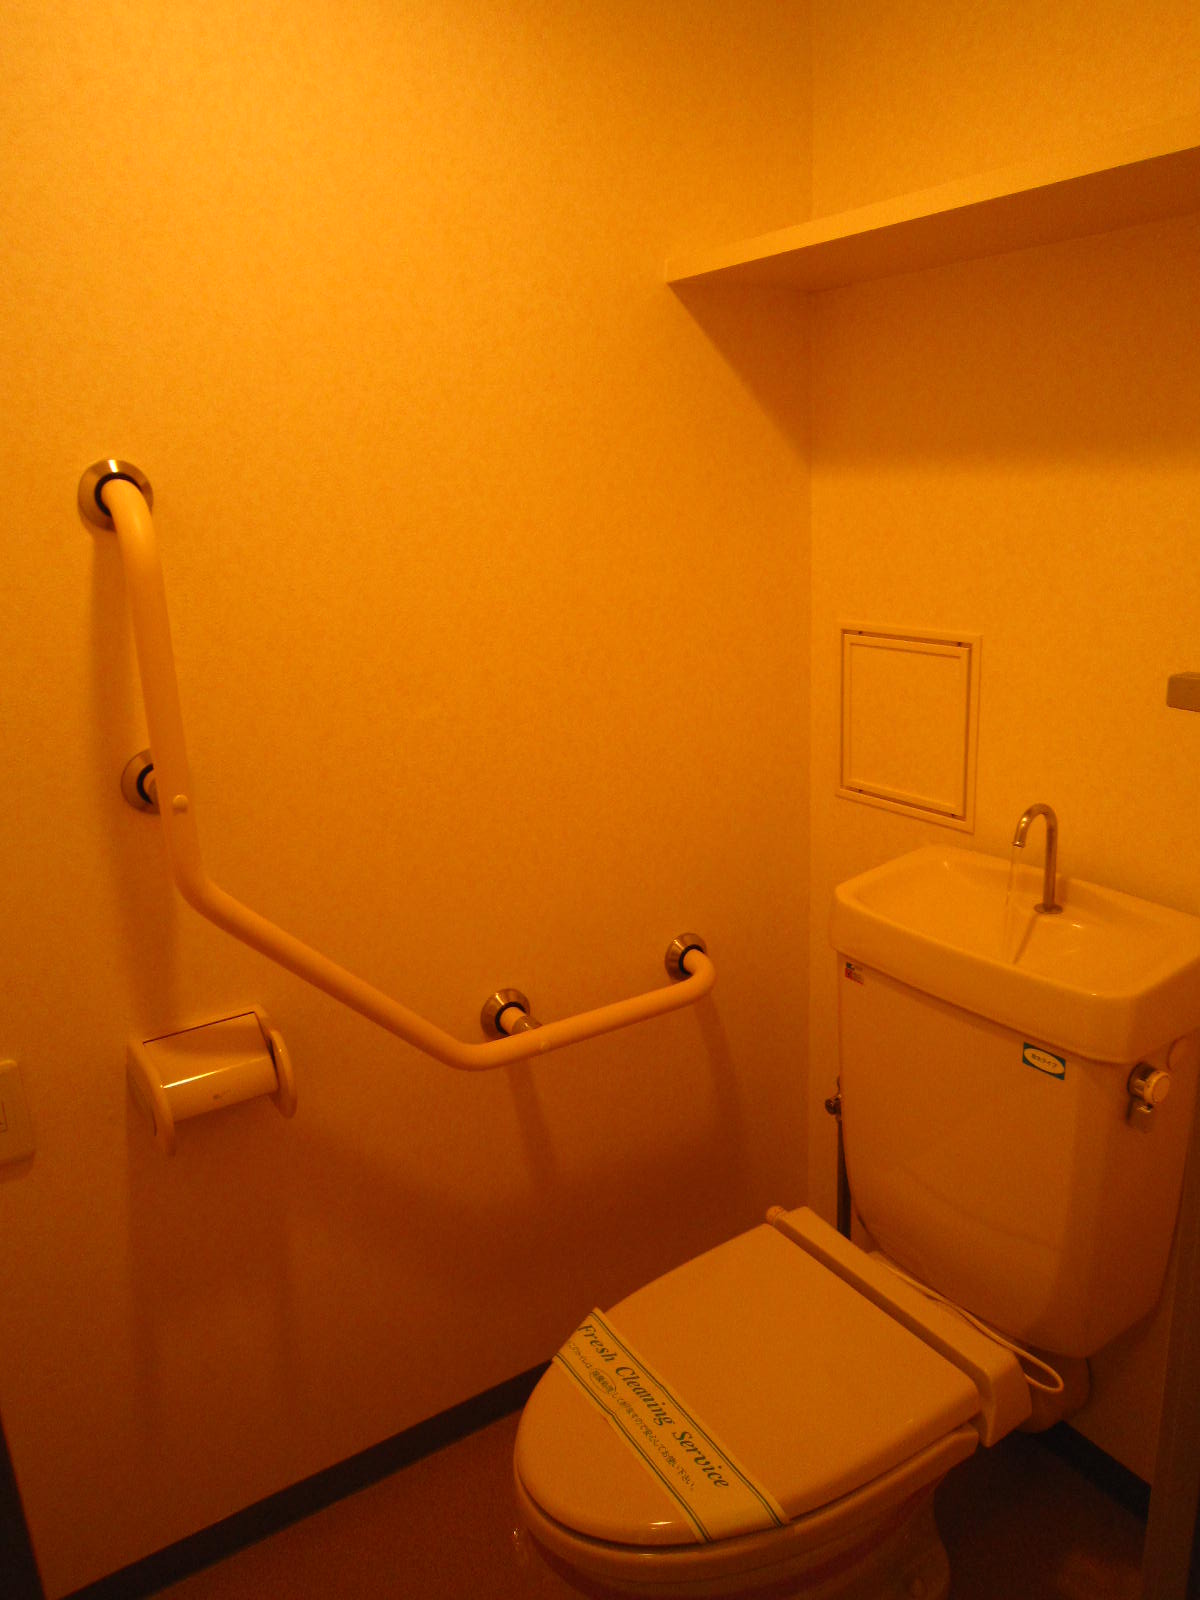 Toilet. Also spread toilet. shelf, With handrail.